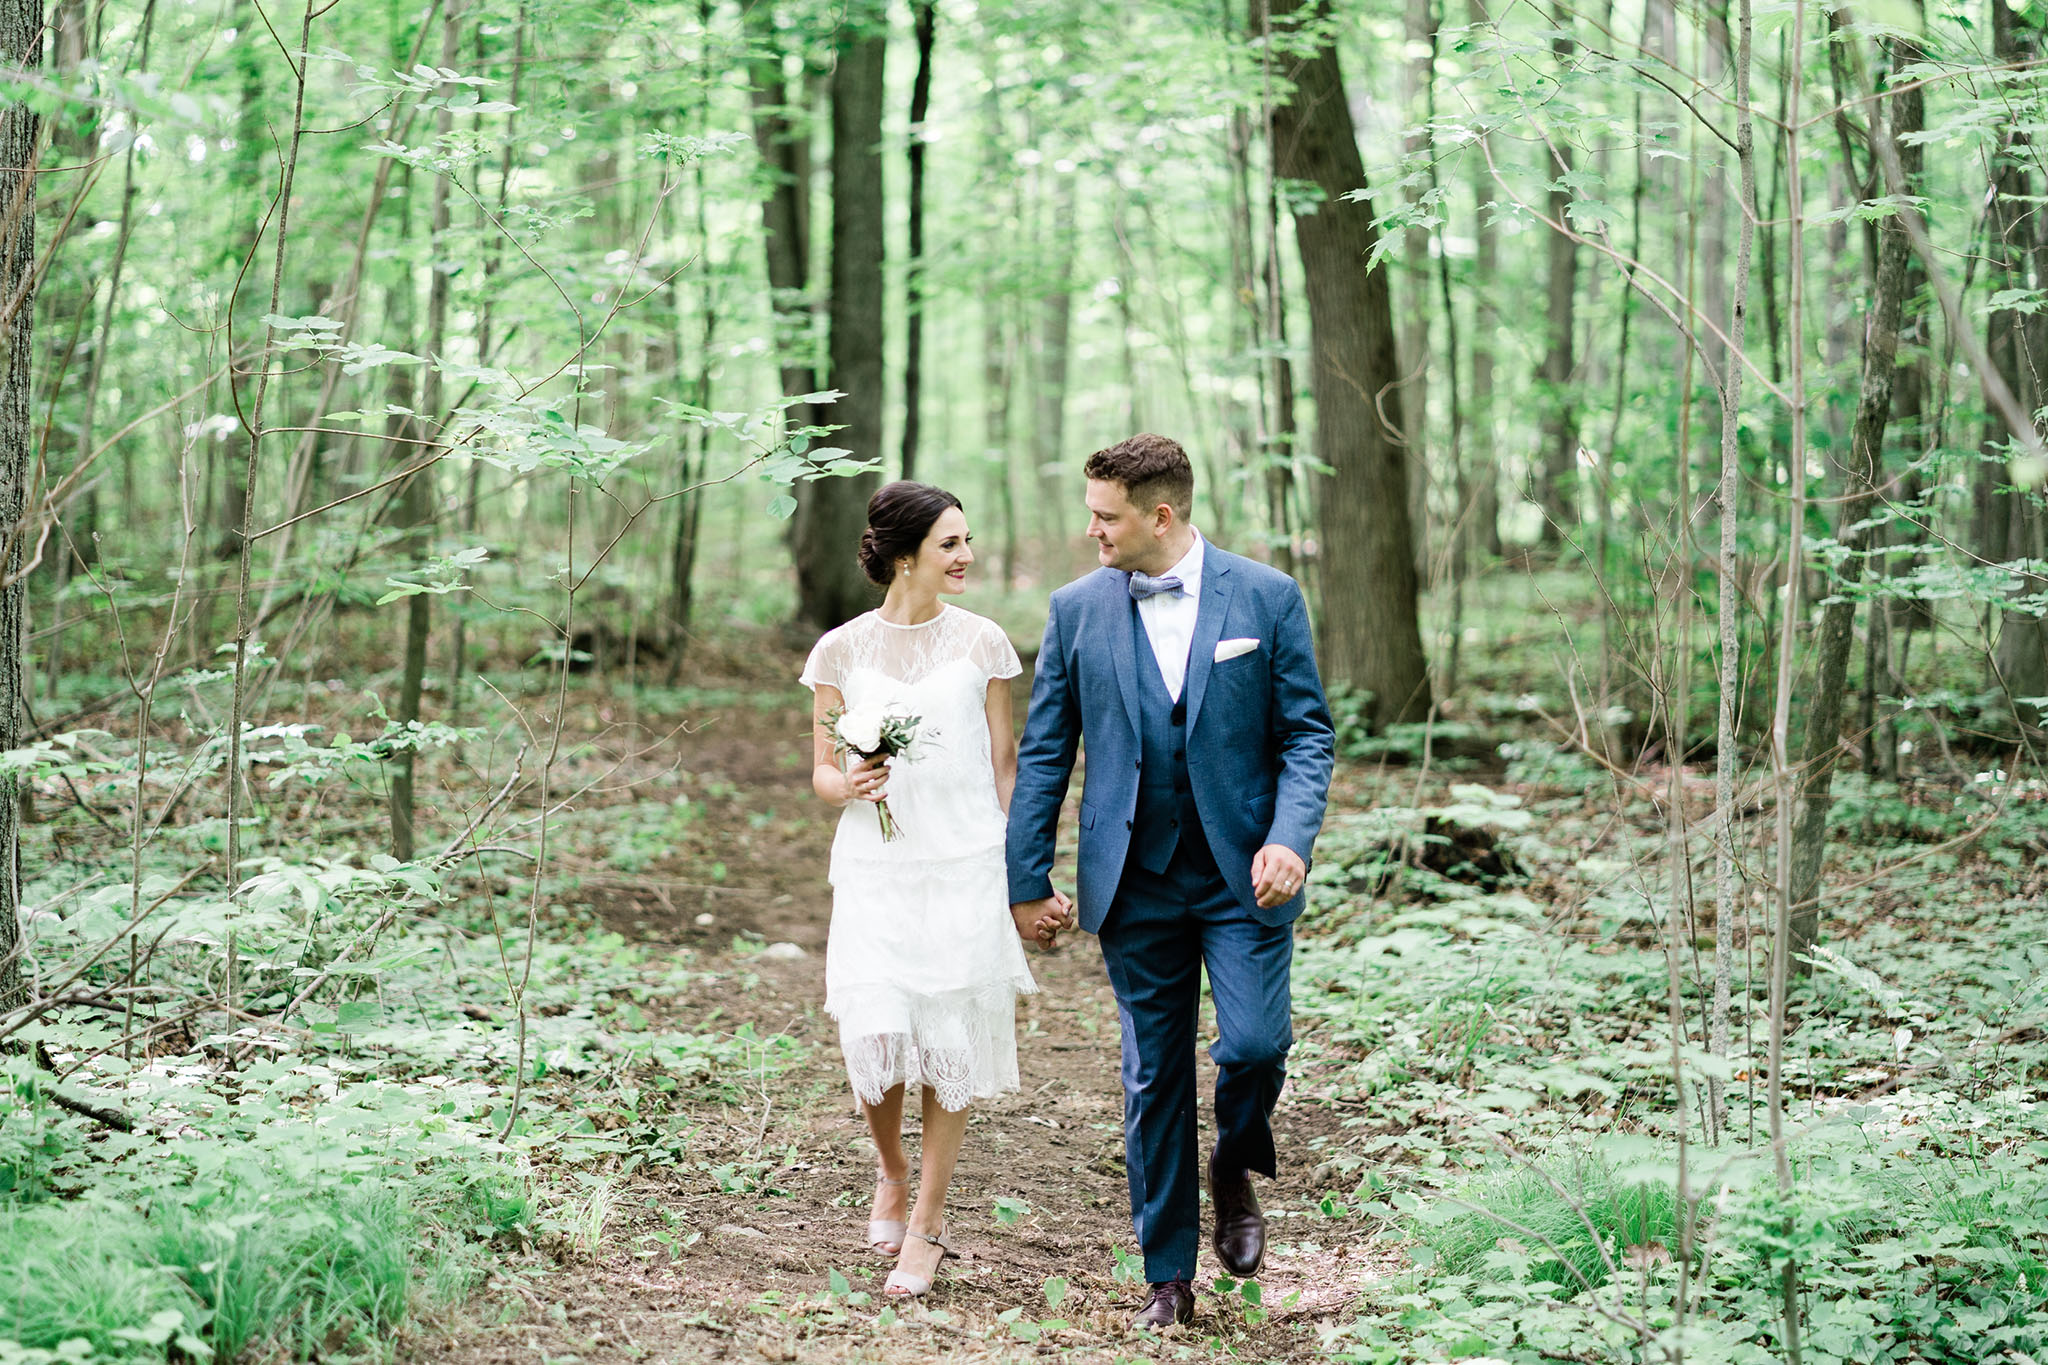 Happily married couple waking thru a quiet and peaceful forest hand in hand, just after getting married. Bride wearing cocktail length dress reminiscent of a 1930's flapper. Gentleman wearing dark blue suit with bowtie. Floral arrangement is small, delicate and classic.